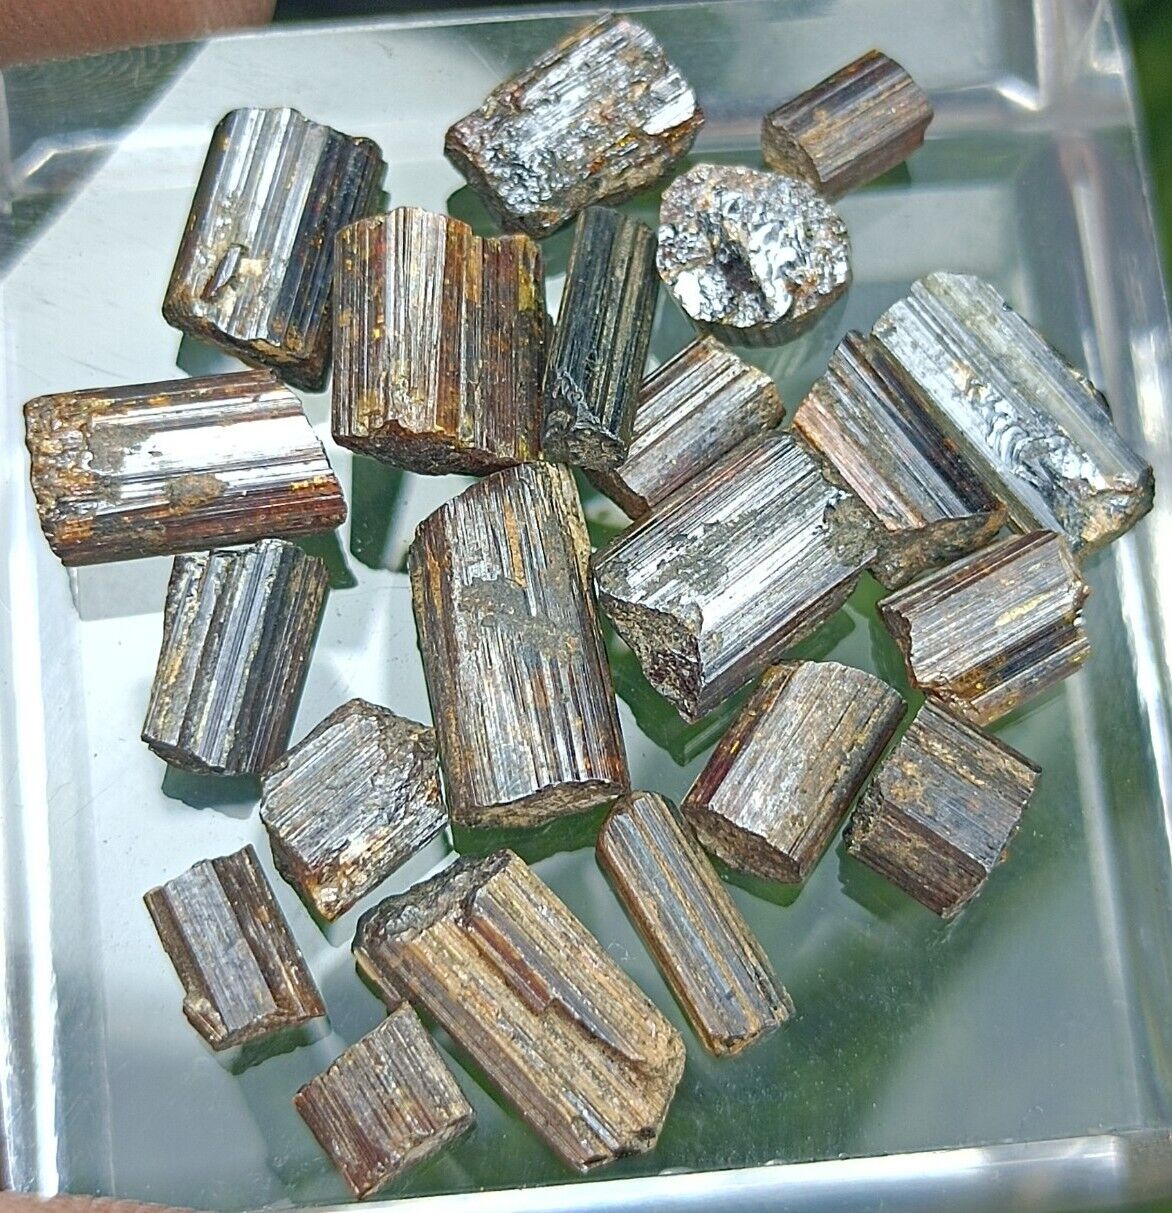 10g Red Rutile Crystals With Nice Termination From Zagi Mountain Kpk Pak